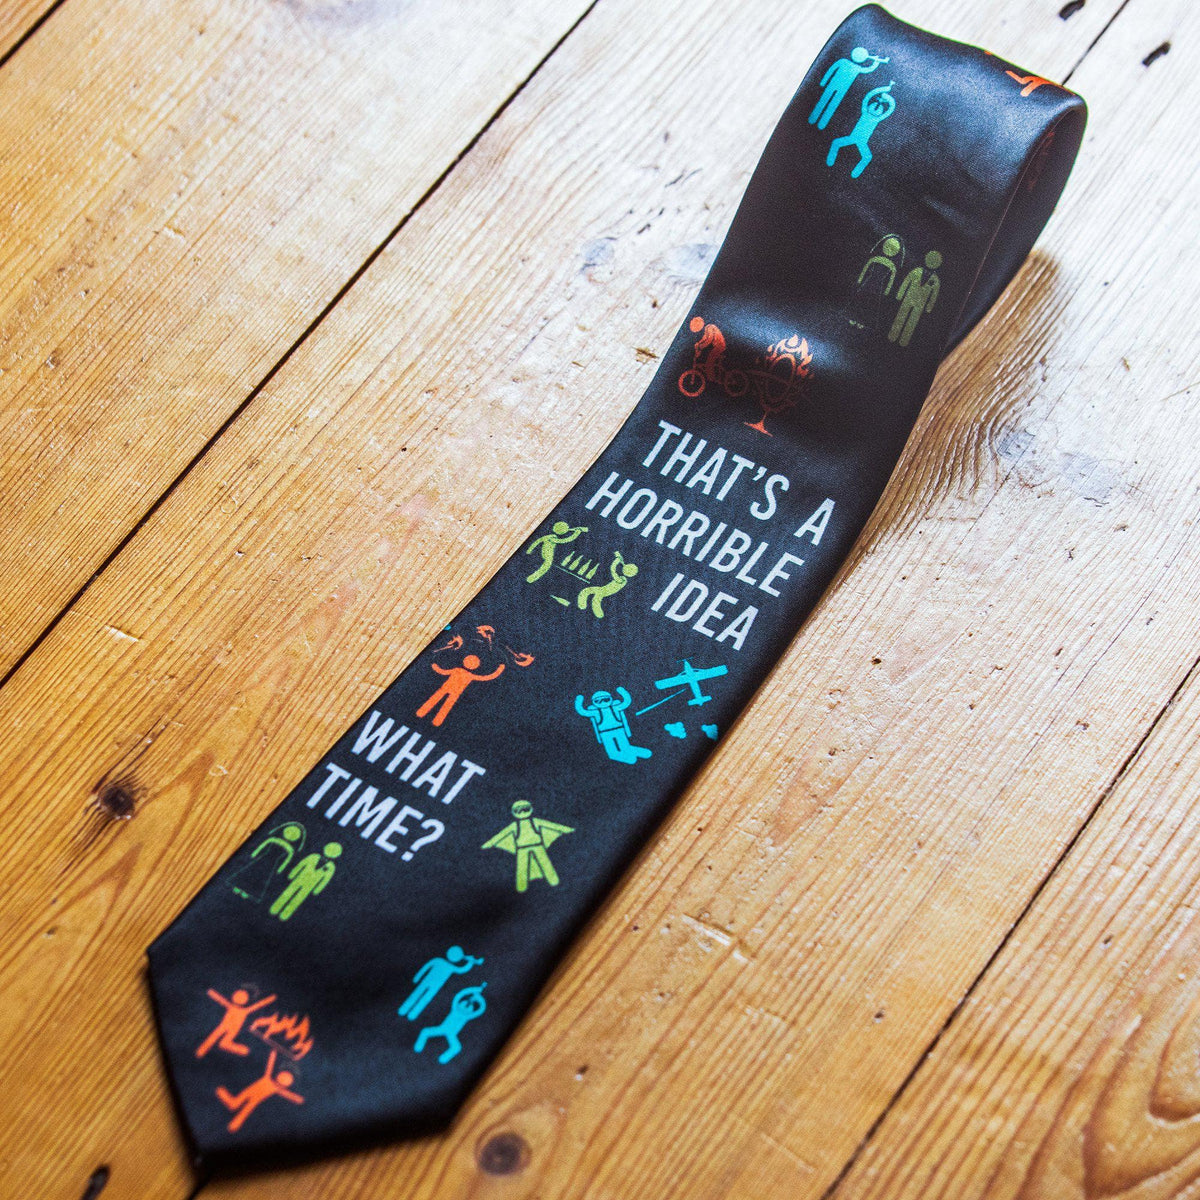 That&#39;s A Horrible Idea What Time Neck Tie - Crazy Dog T-Shirts